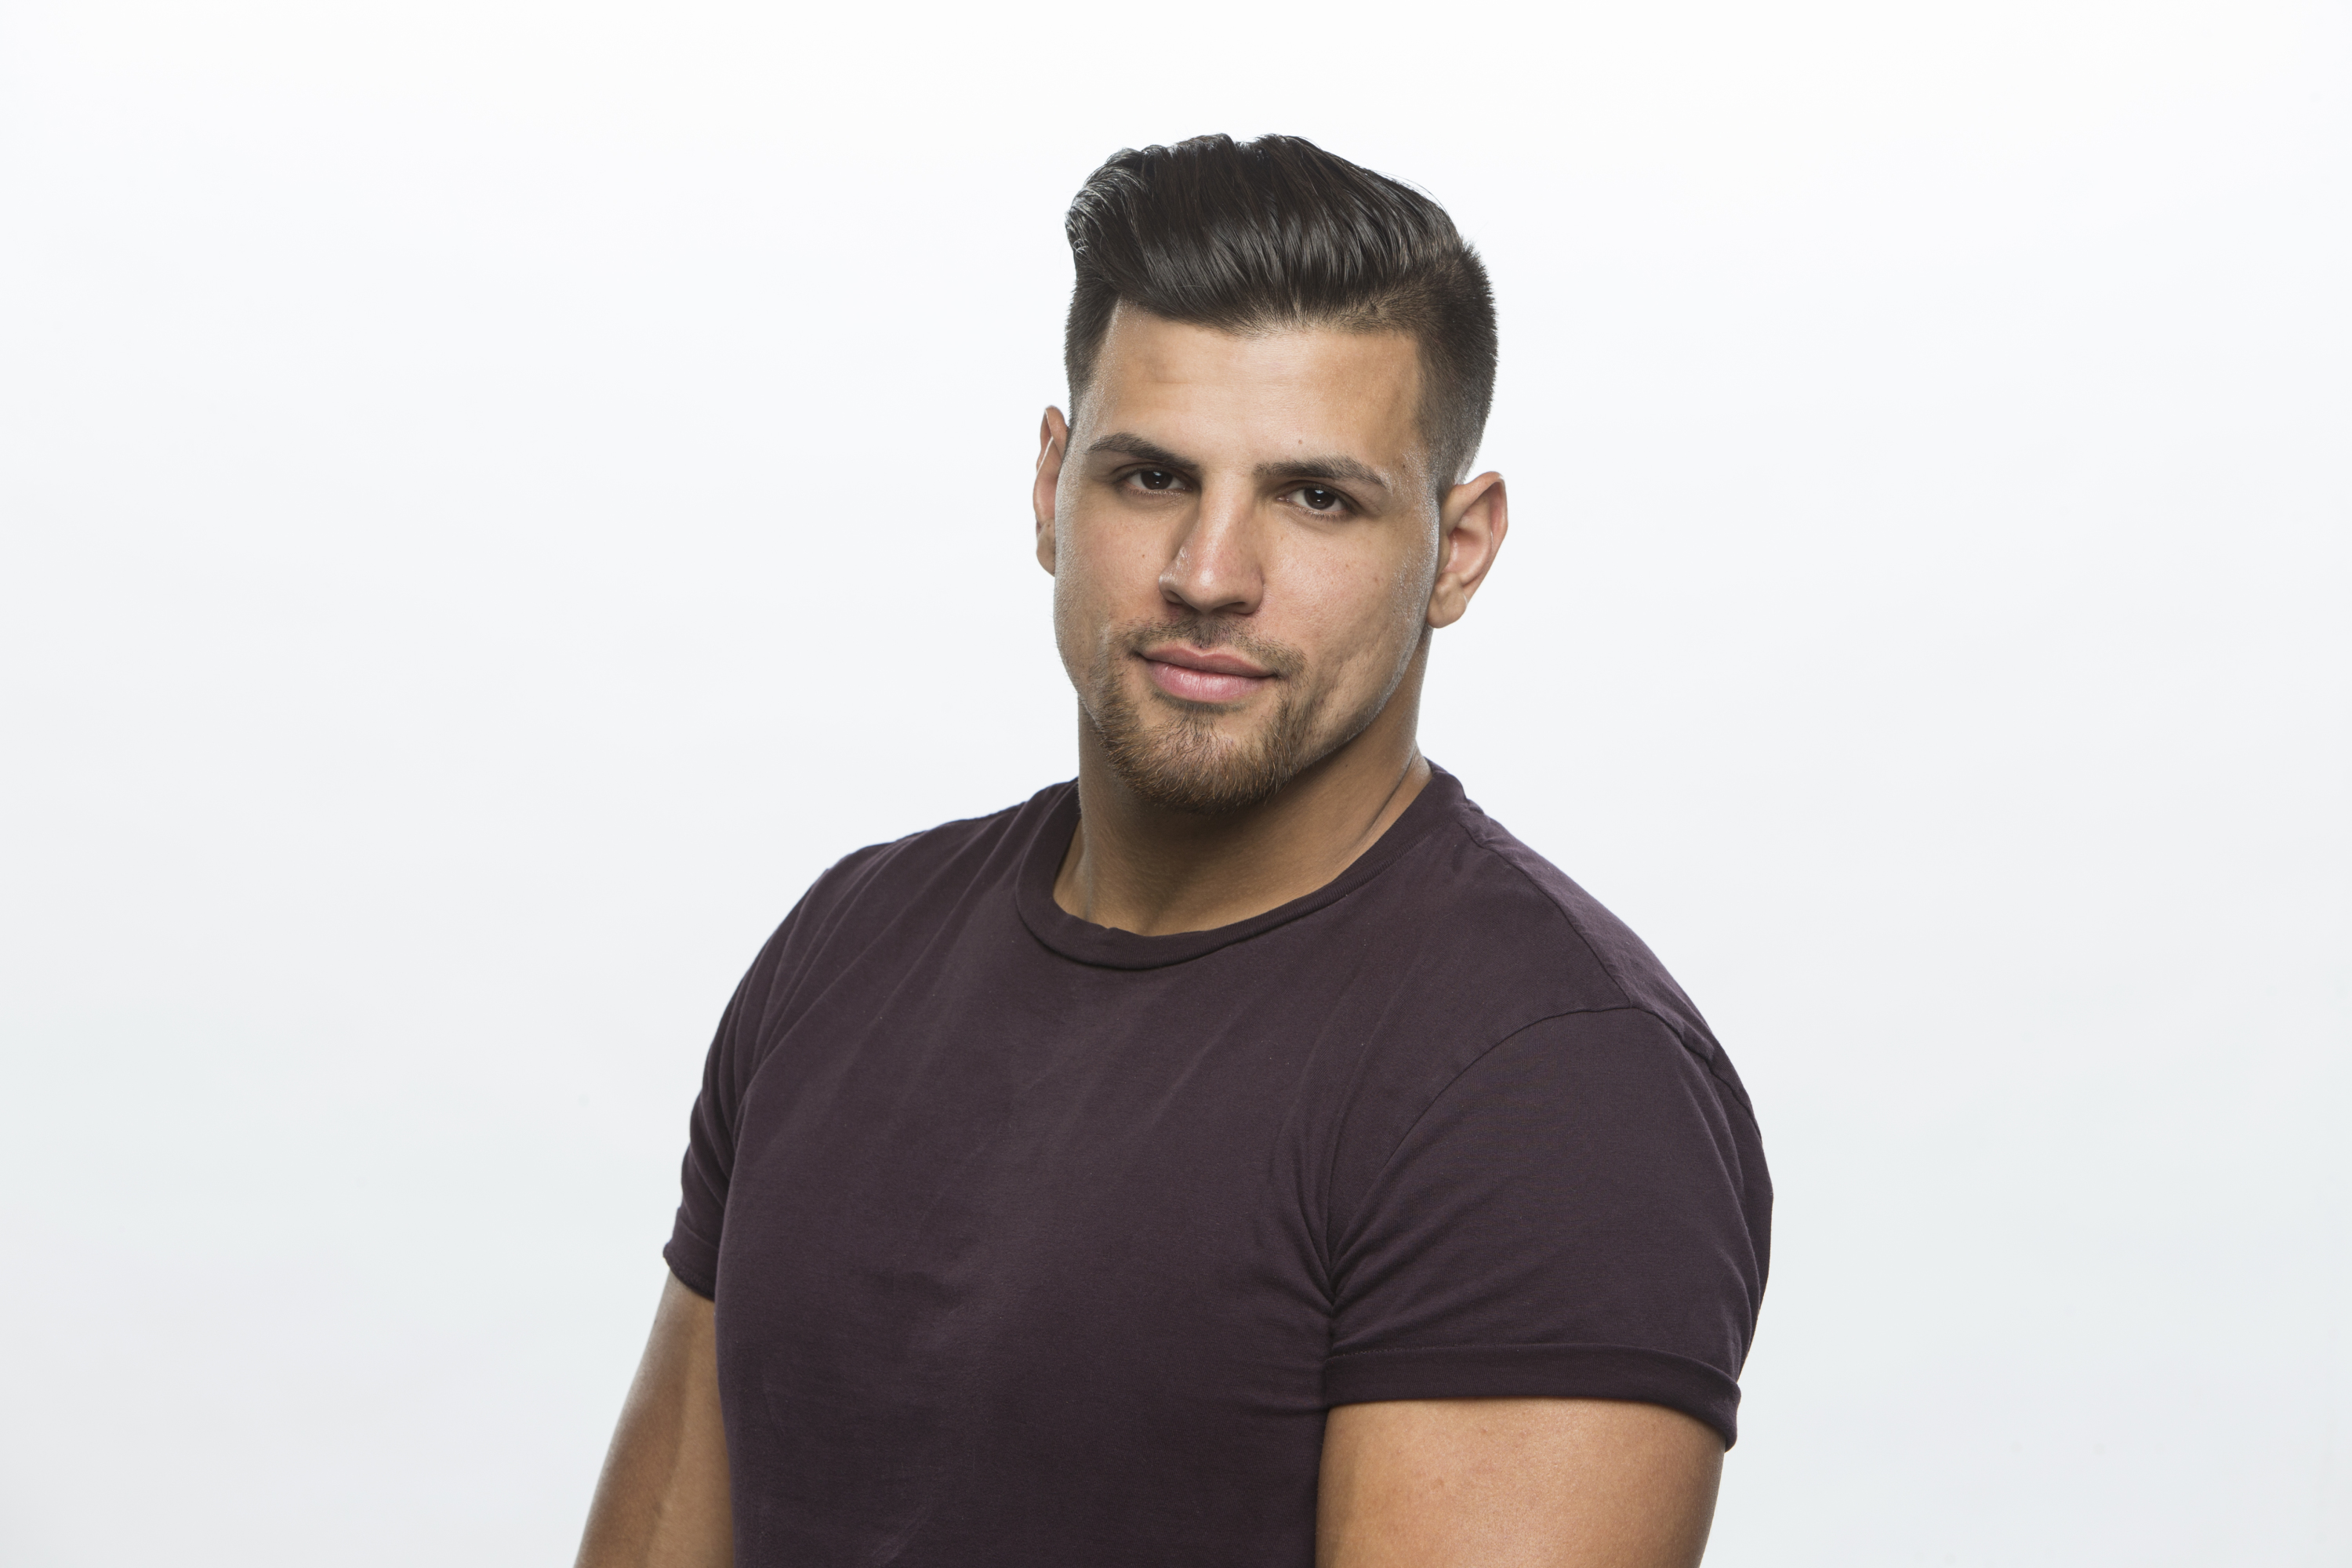 Fessy Shafaat poses for 'Big Brother 20' cast photo